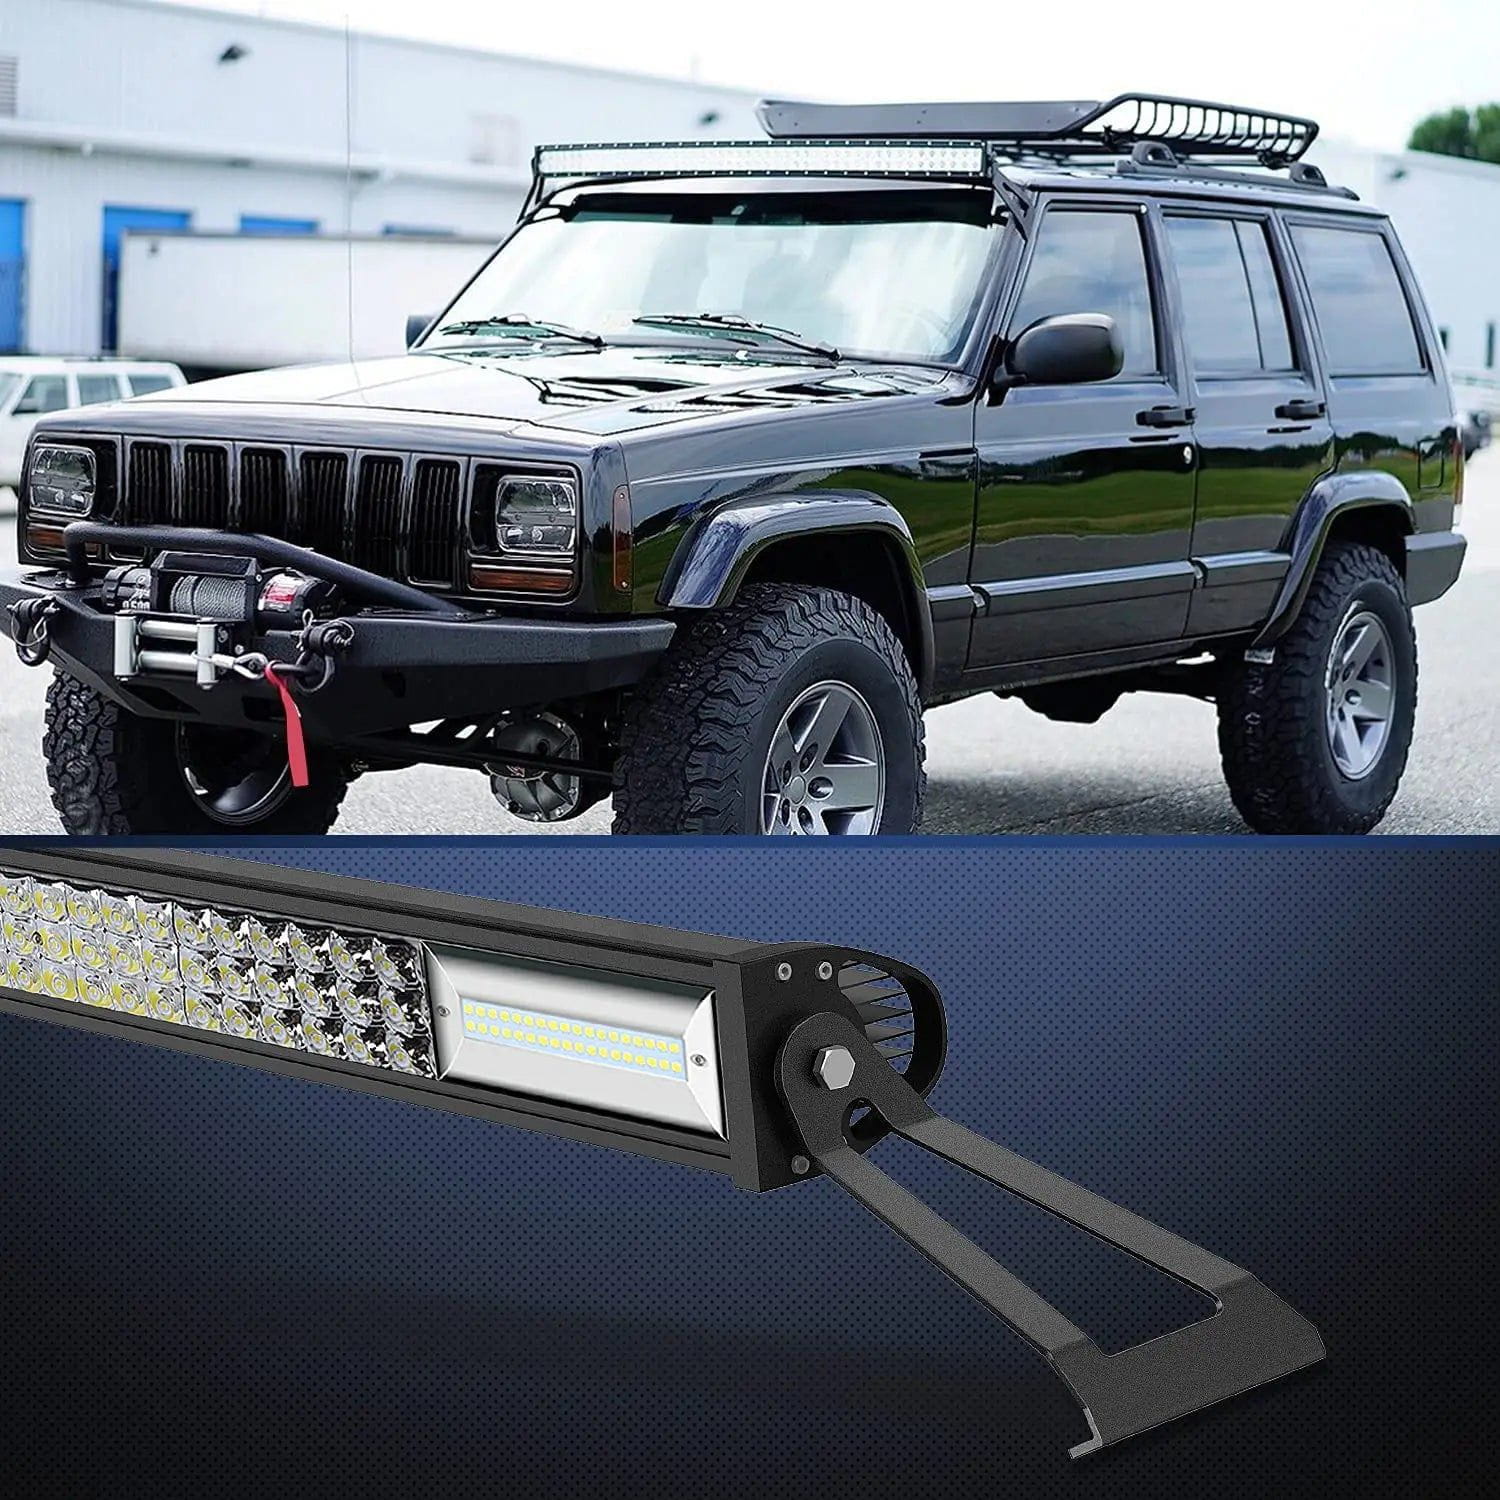 Mounting Accessory 50” Curved Light Bar Bracket at Upper Windshield Roof Cab for 1984-2001 Jeep Cherokee XJ & 1986-1992 Comanche MJ (Pair)